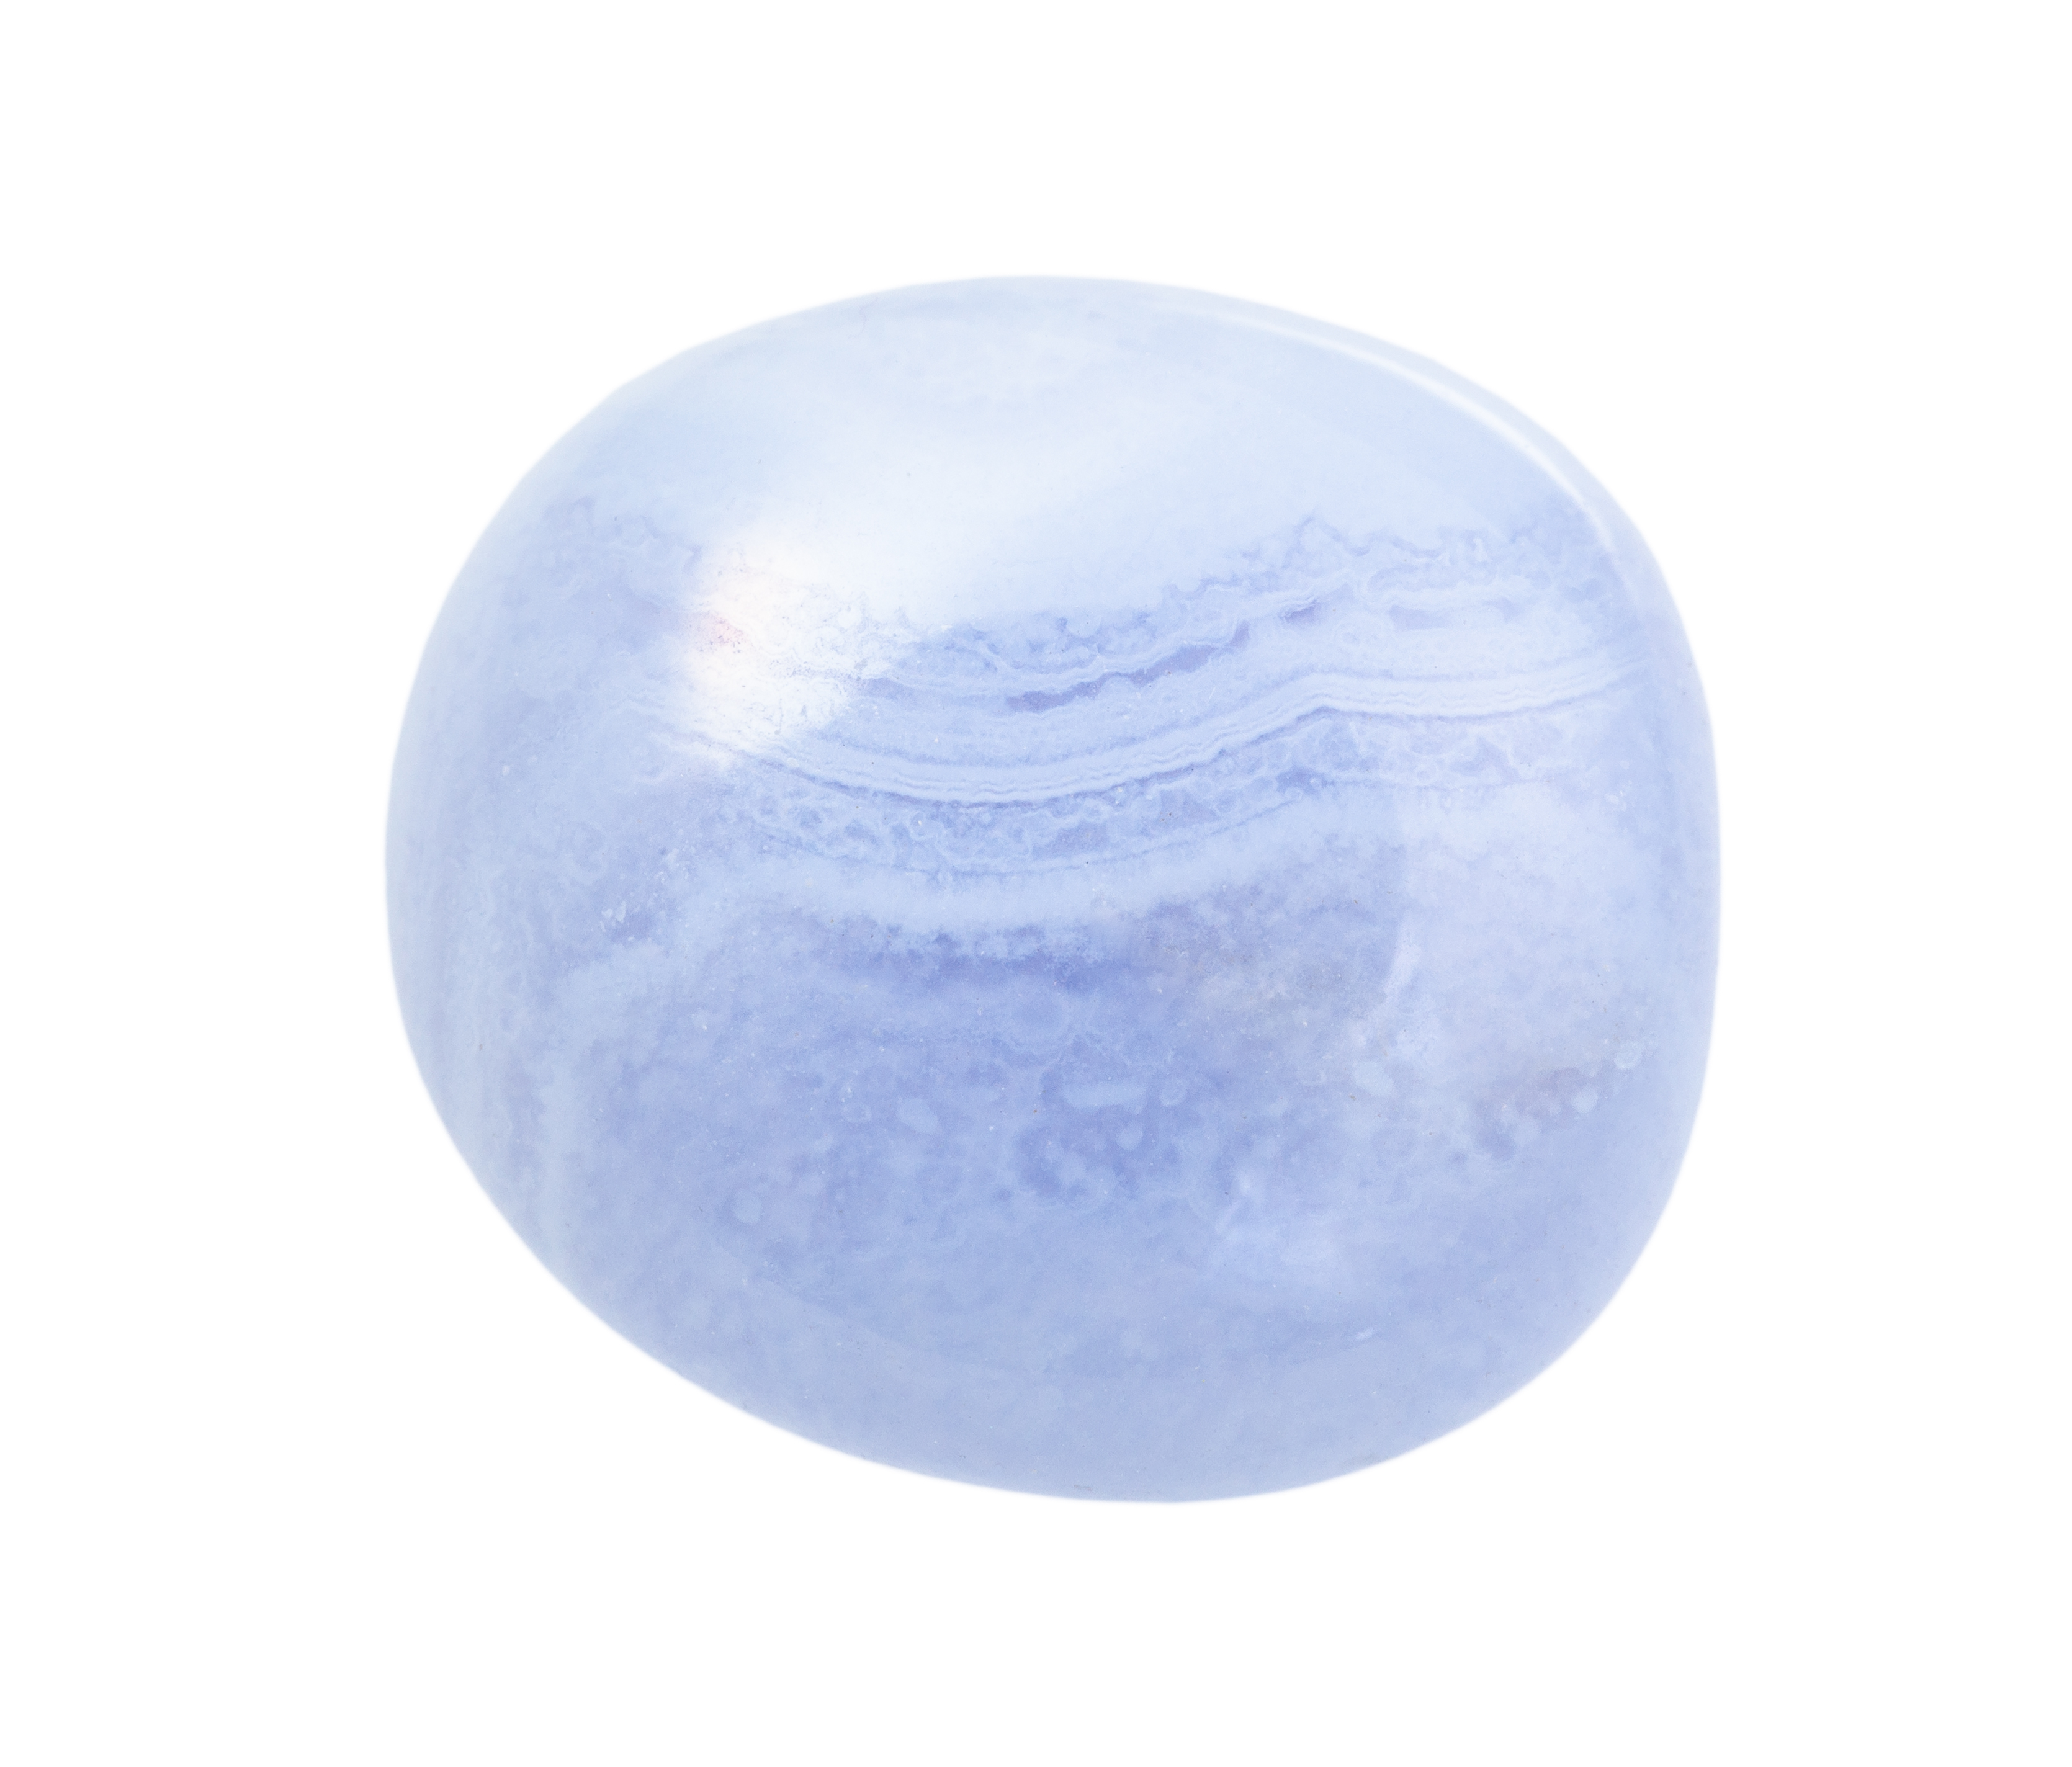 An image of blue lace agate